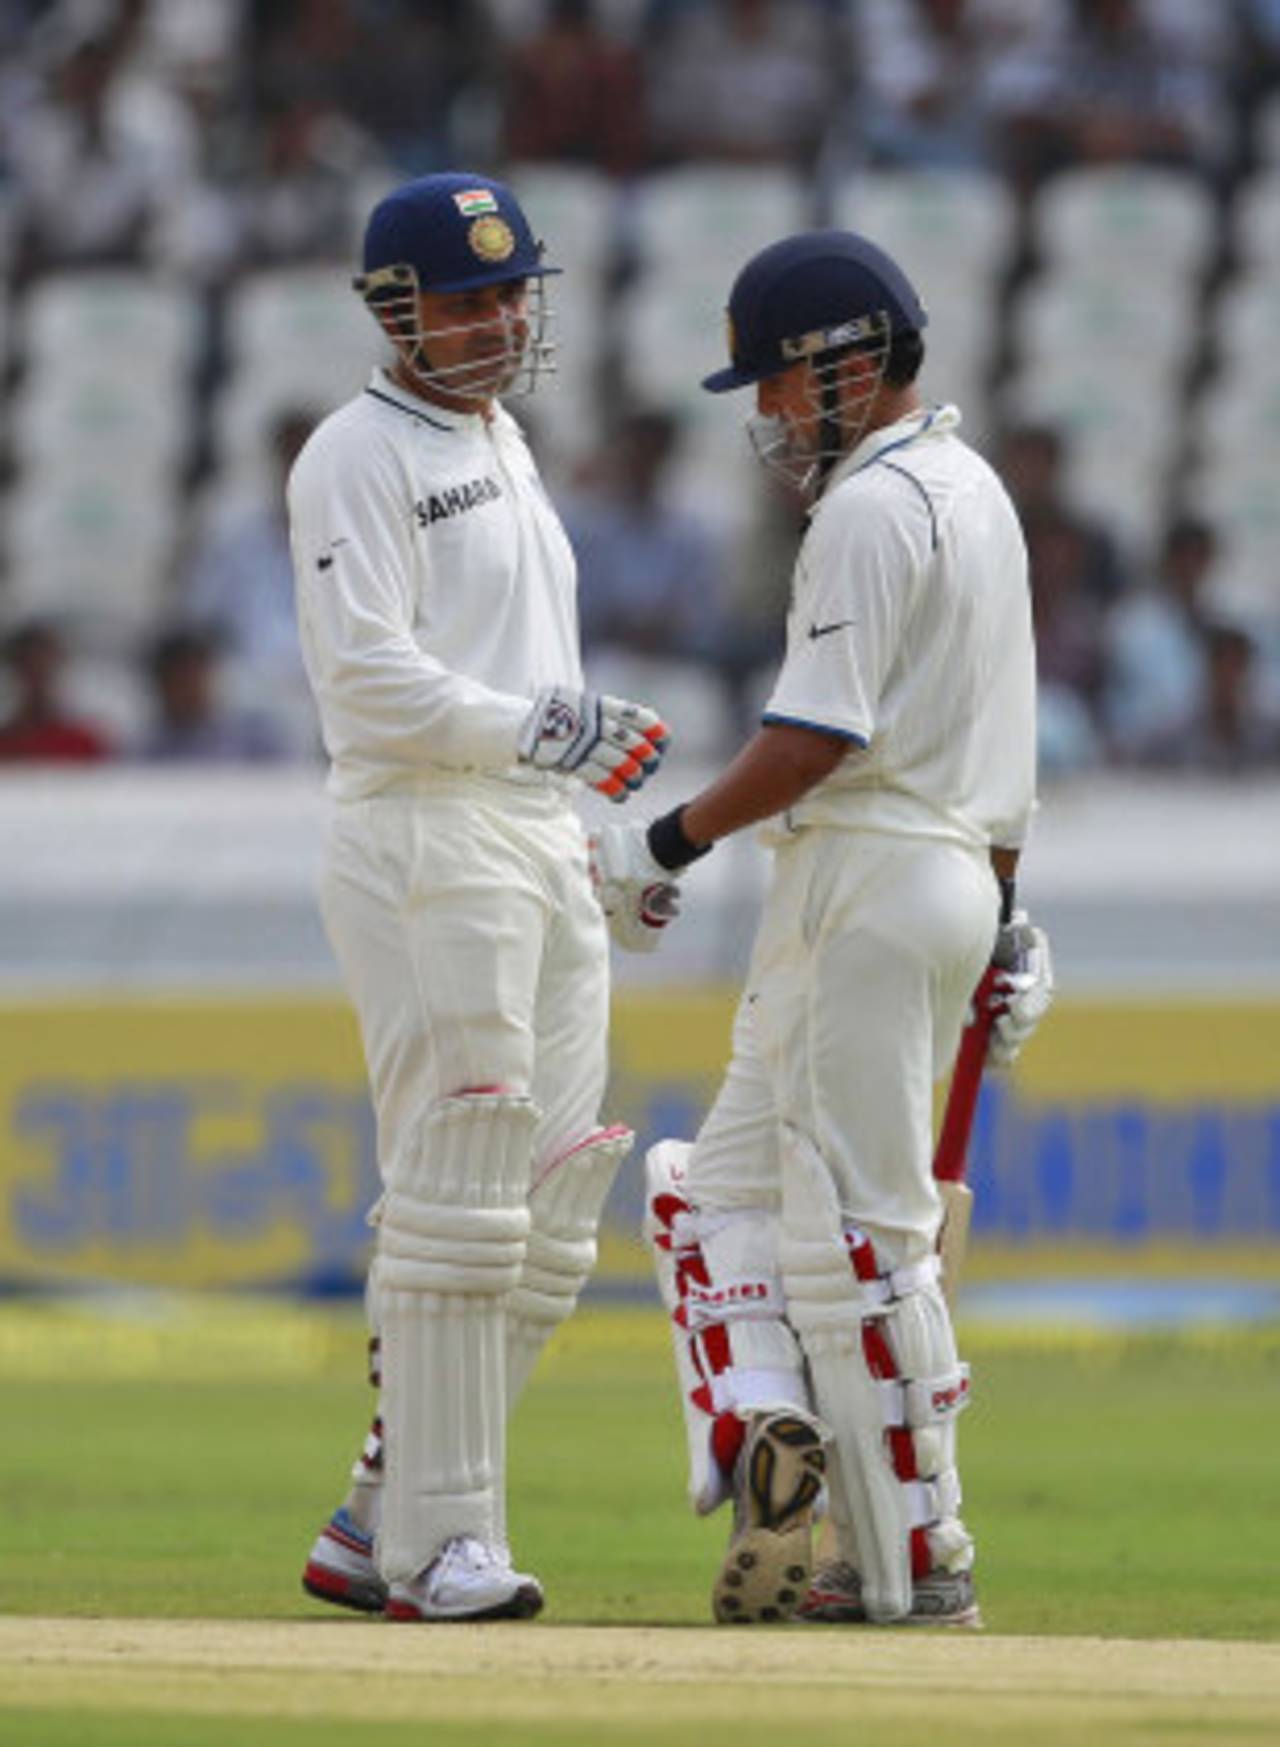 Ghaziabad promises bigger crowds for Sehwag and Gambhir than even some Test venues&nbsp;&nbsp;&bull;&nbsp;&nbsp;Associated Press